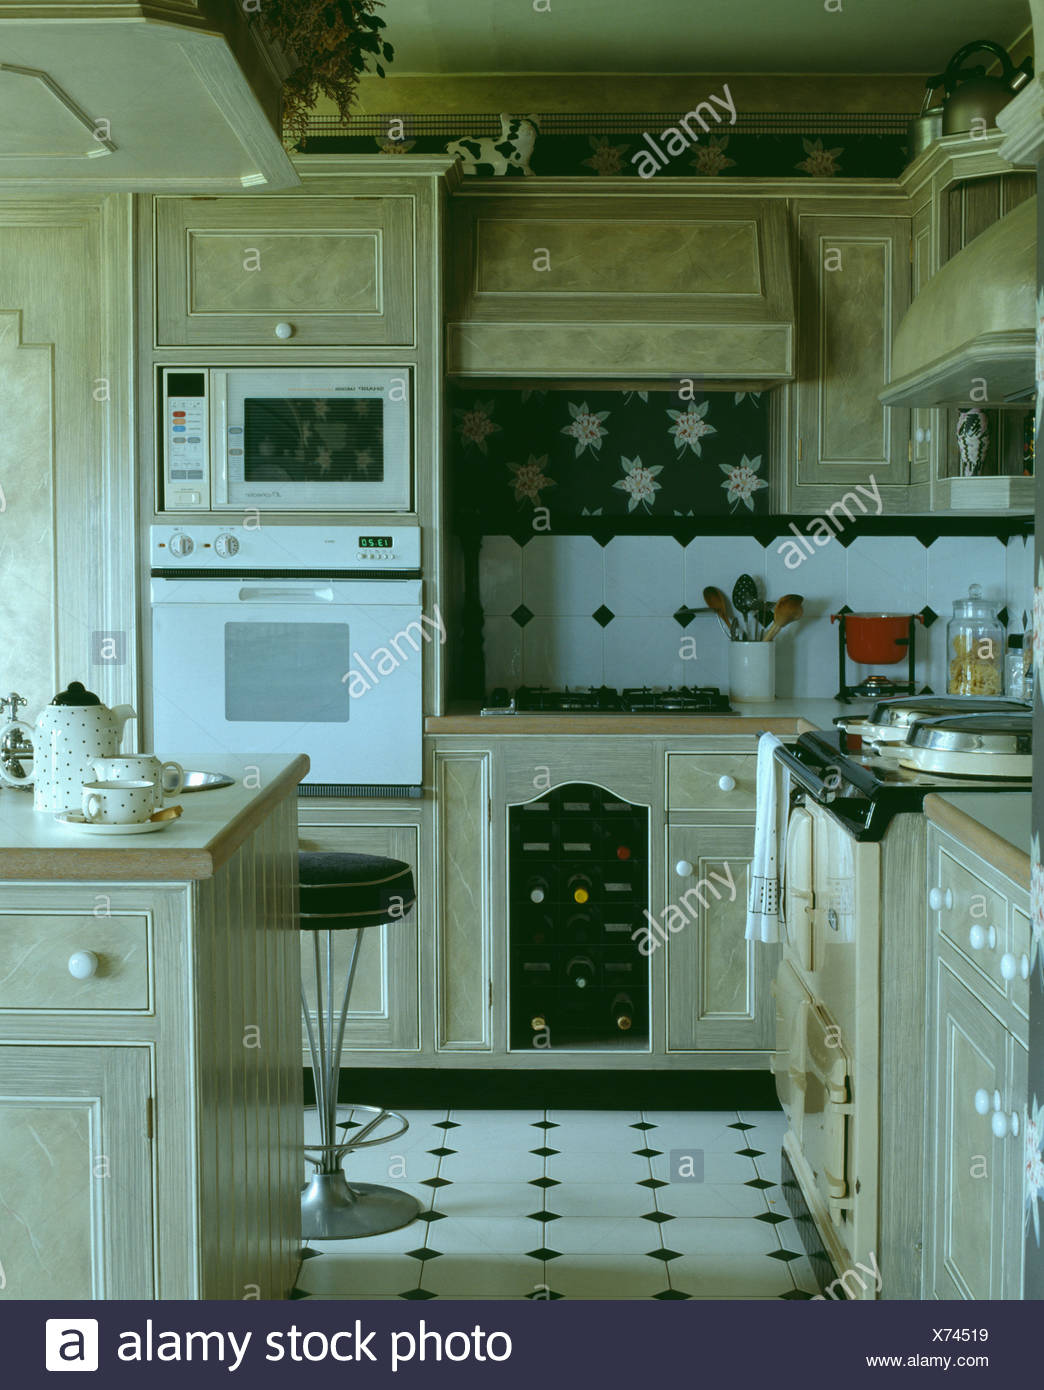 Eye Level Microwave And White Oven In Kitchen With Paint